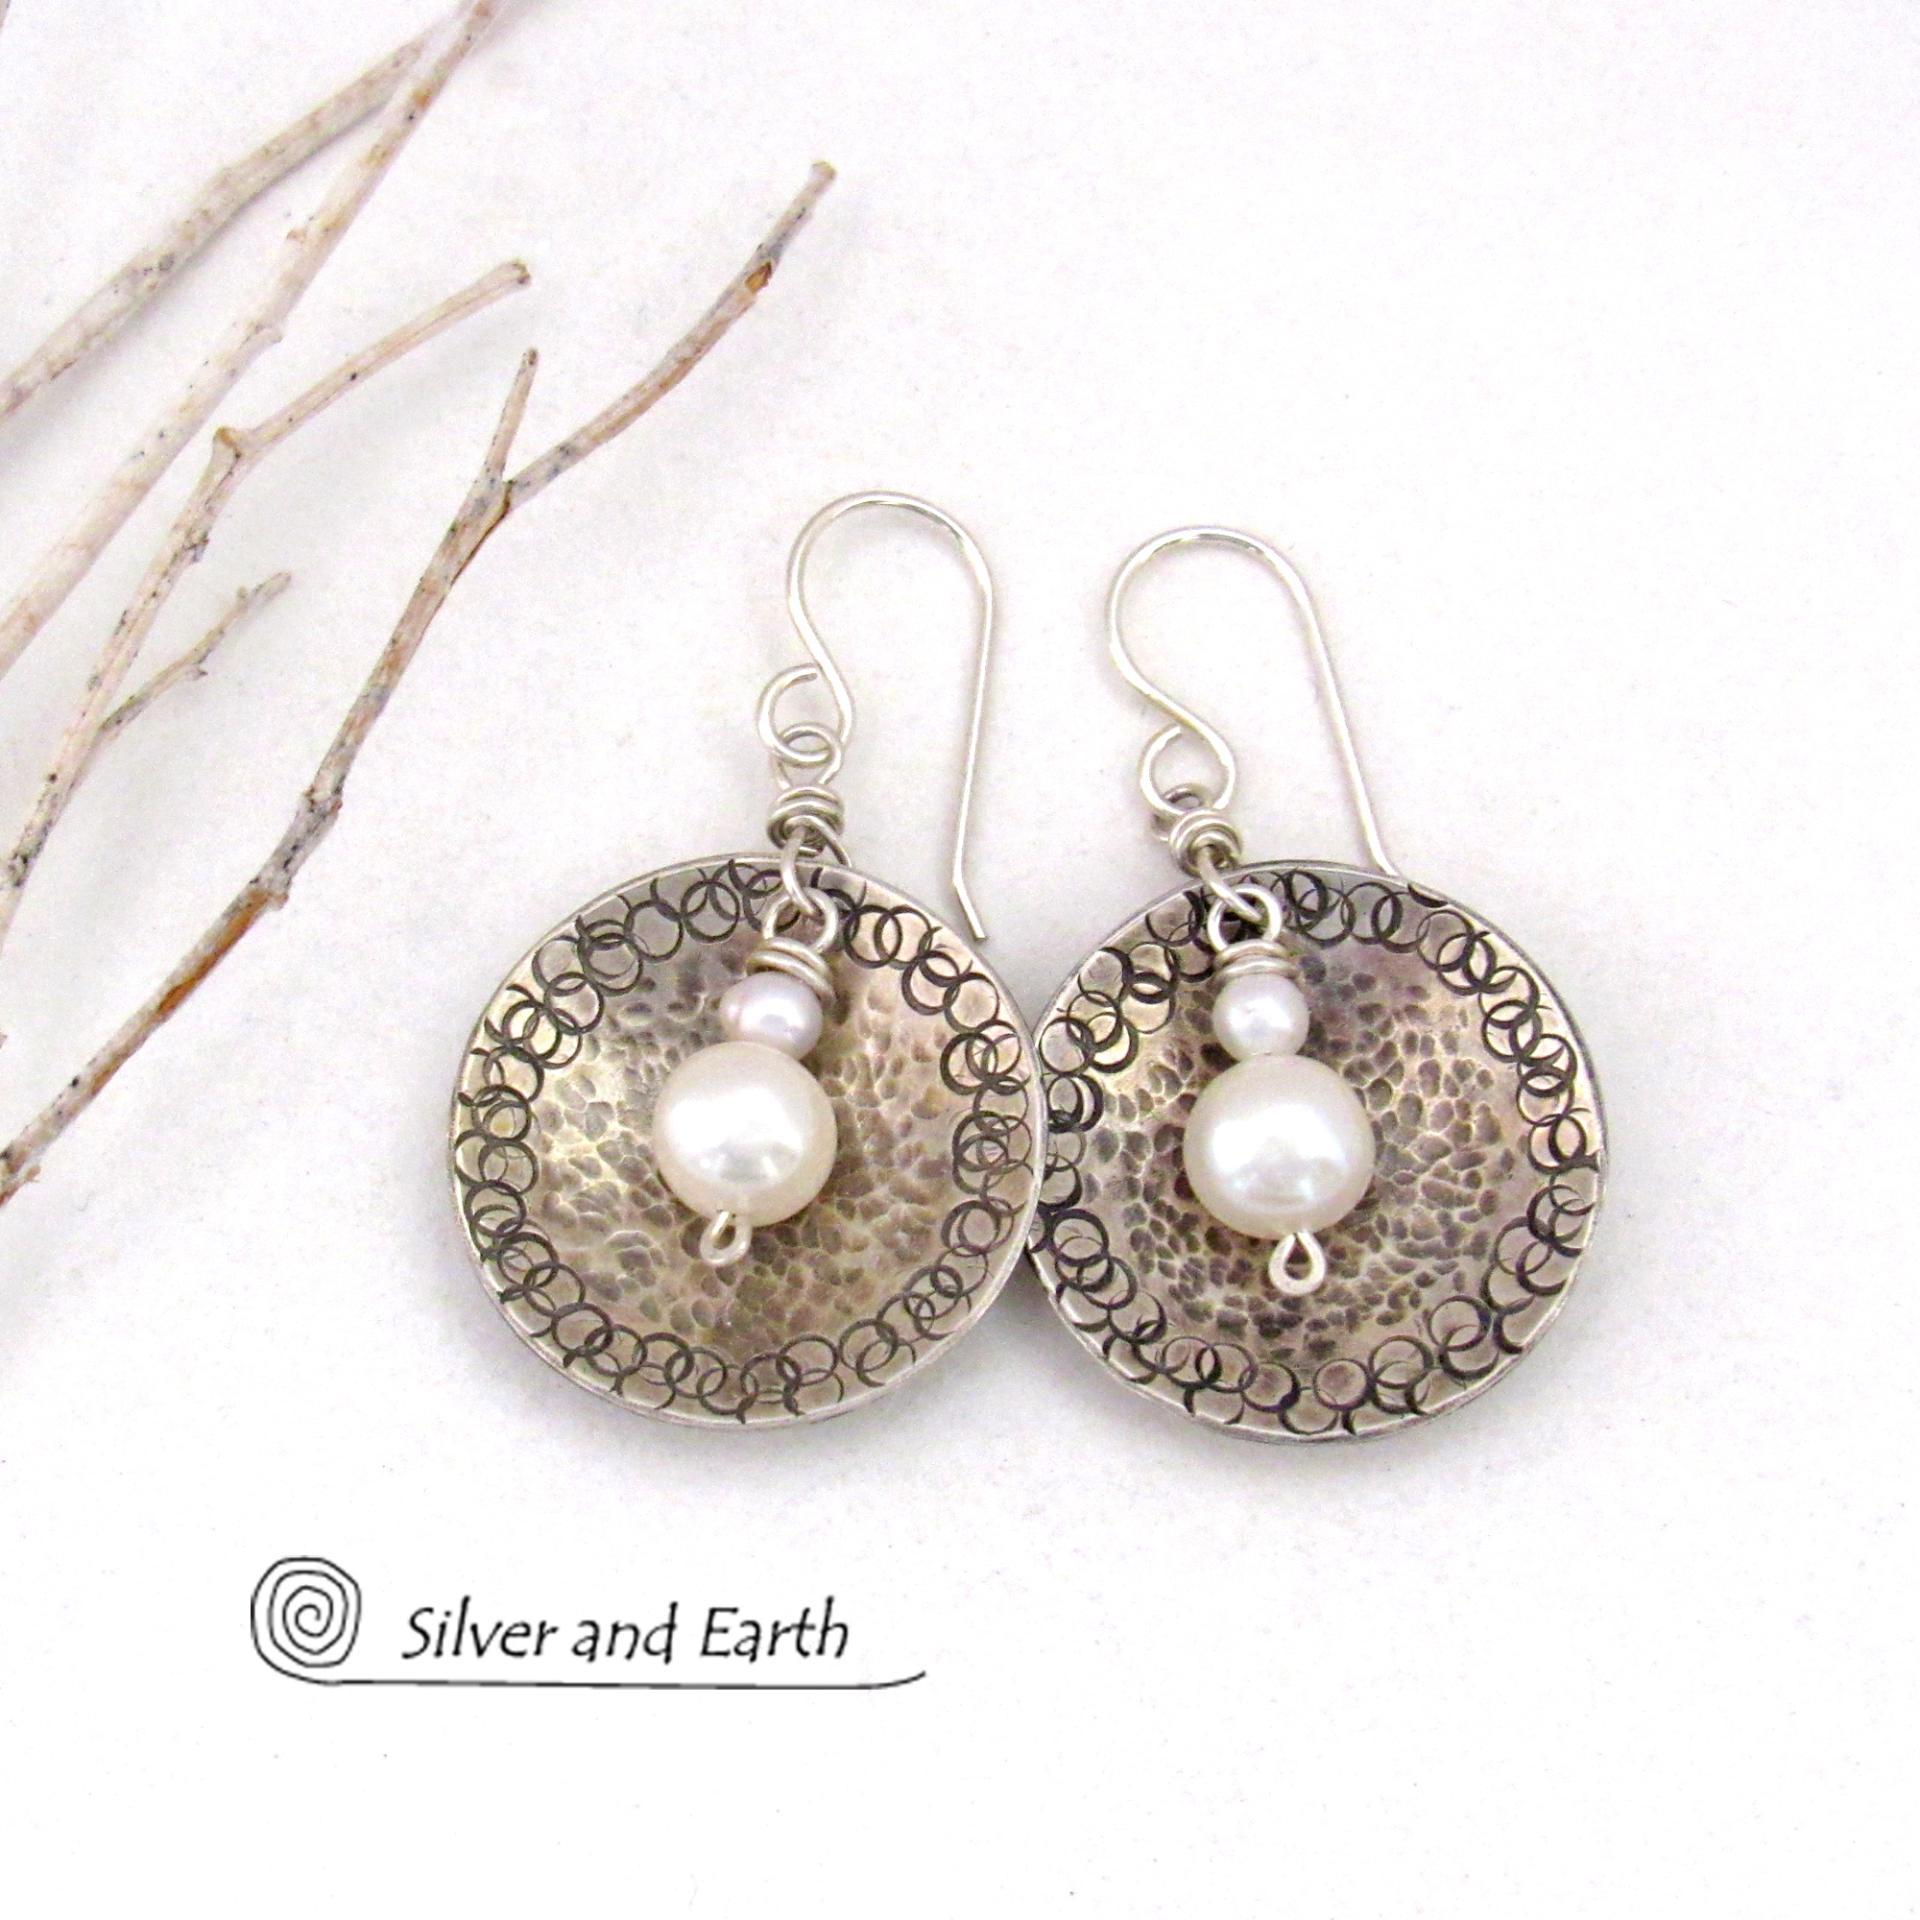 Small Sterling Silver Earrings with Dangling White Pearls - Modern Silver Jewelry